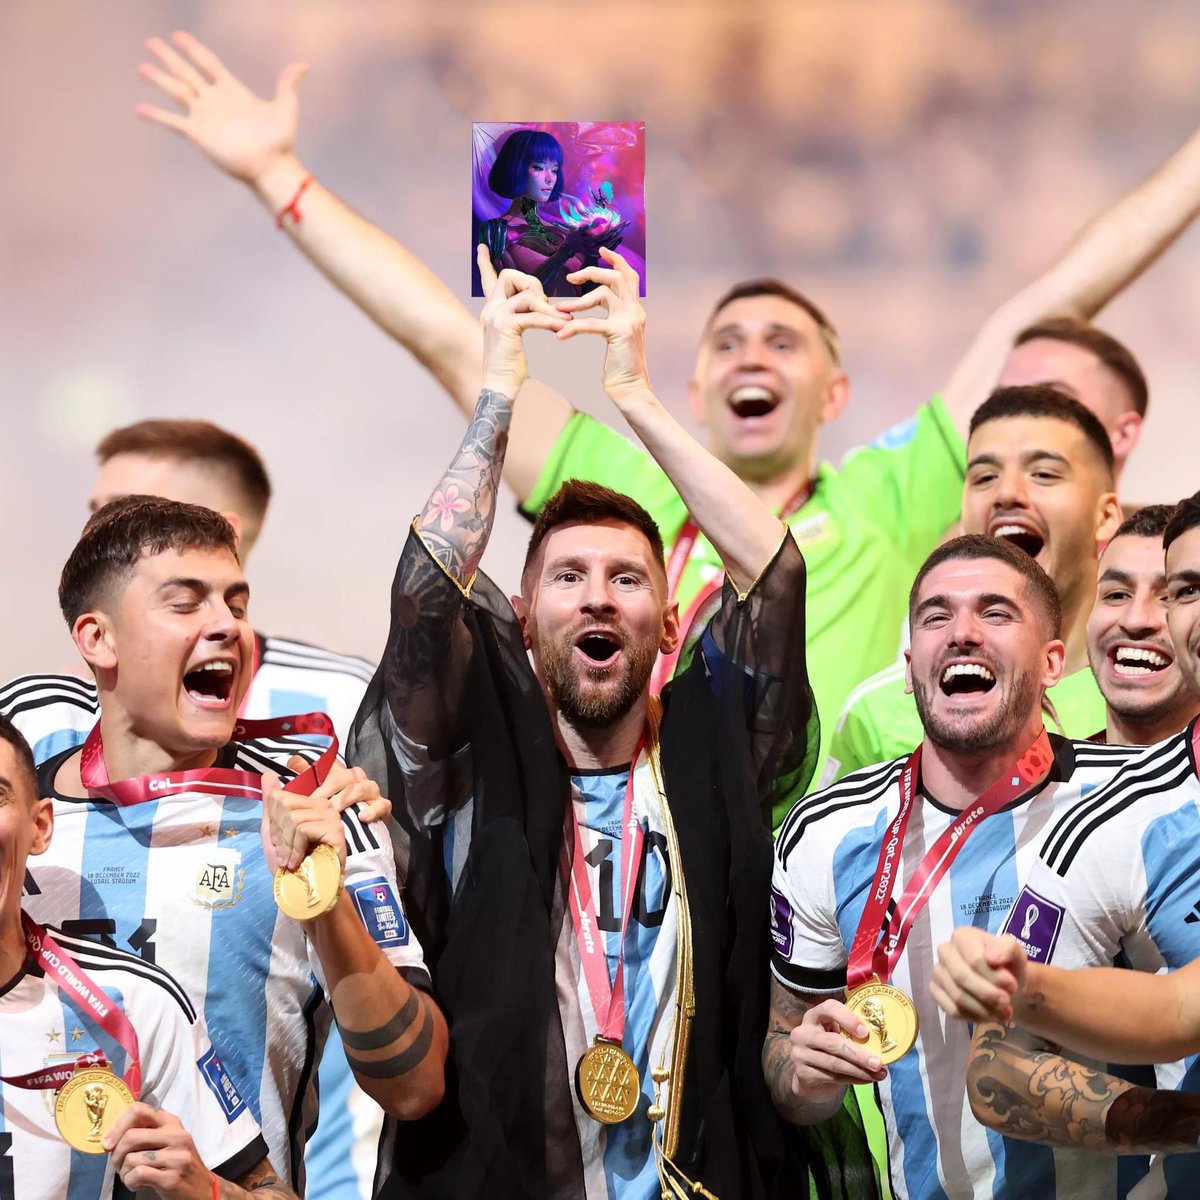 MESSI AND THE BOYS CELEBRATING ALBUM OF THE YEAR 😍

WE WOULD ALSO LIKE TO CONGRATULATE YOU AND TEAM ARGENTINA FOR THE CUP 👏🫶

#withindestruction #lotus #aoty #messi #argentina #worldcup